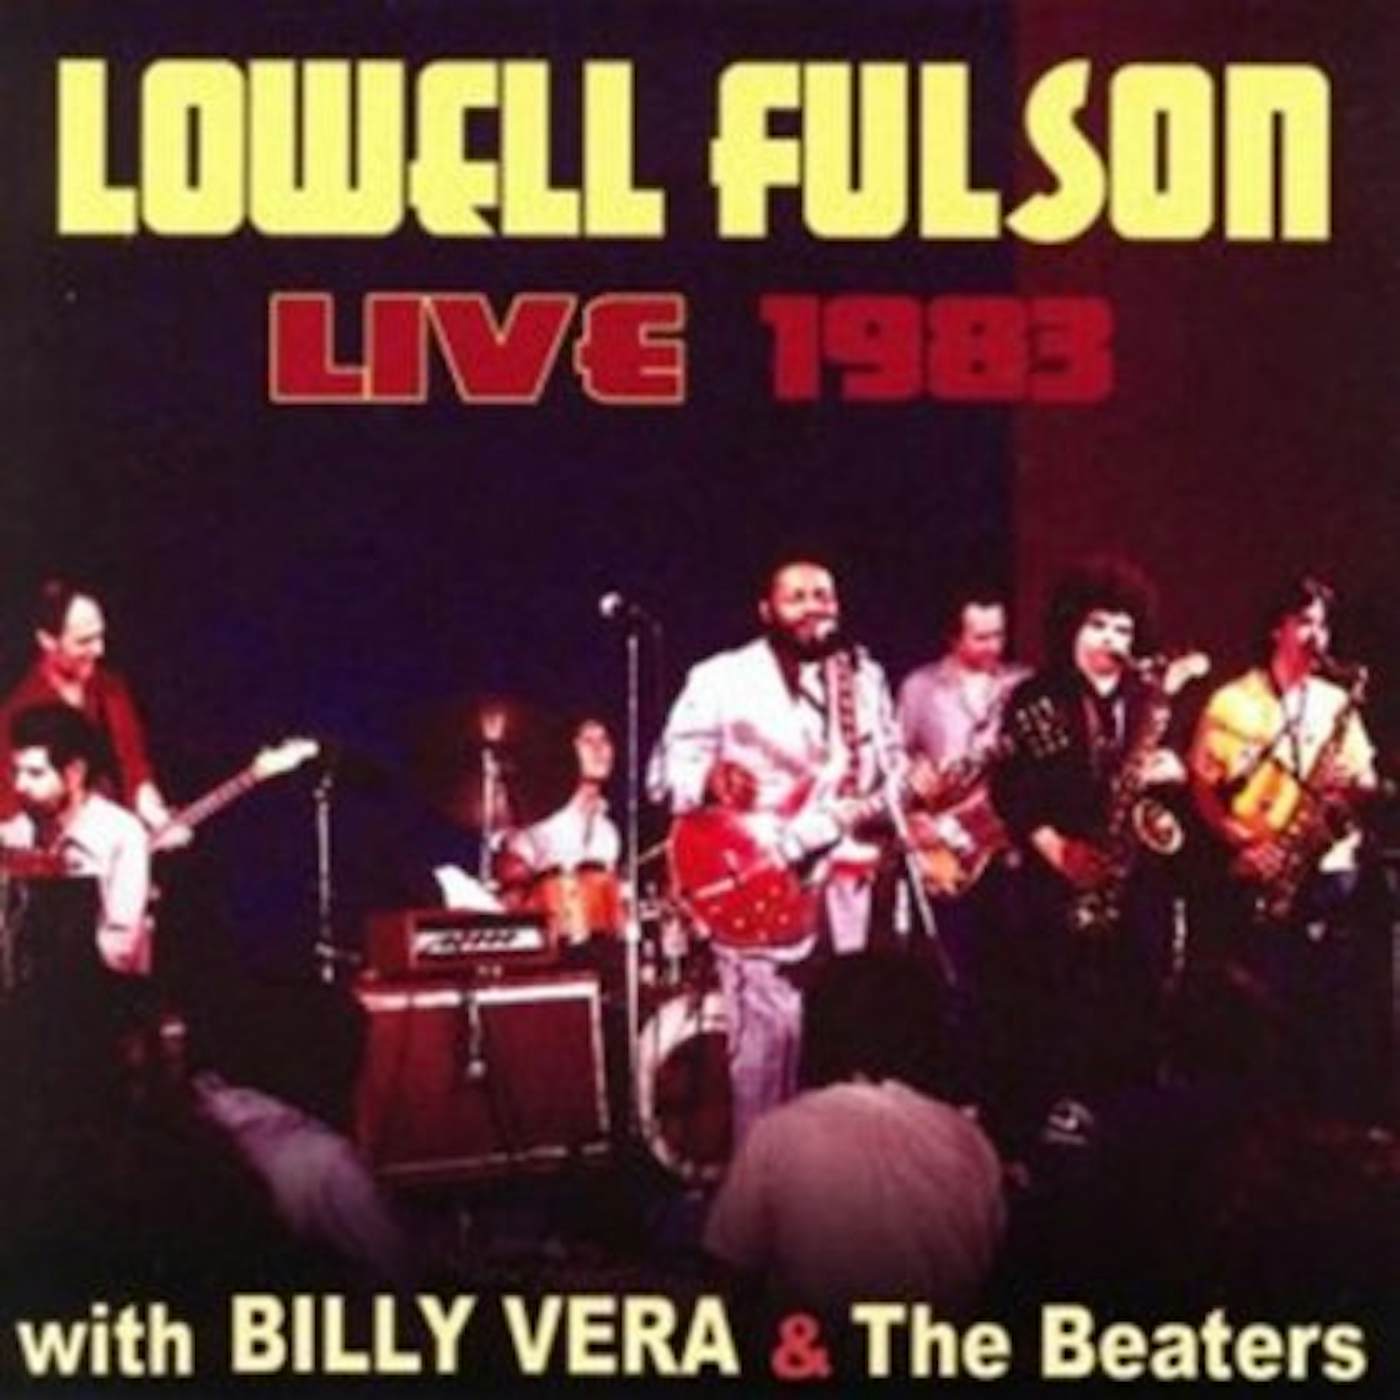 Lowell Fulson LIVE WITH BILLY VERA & THE BEATERS CD